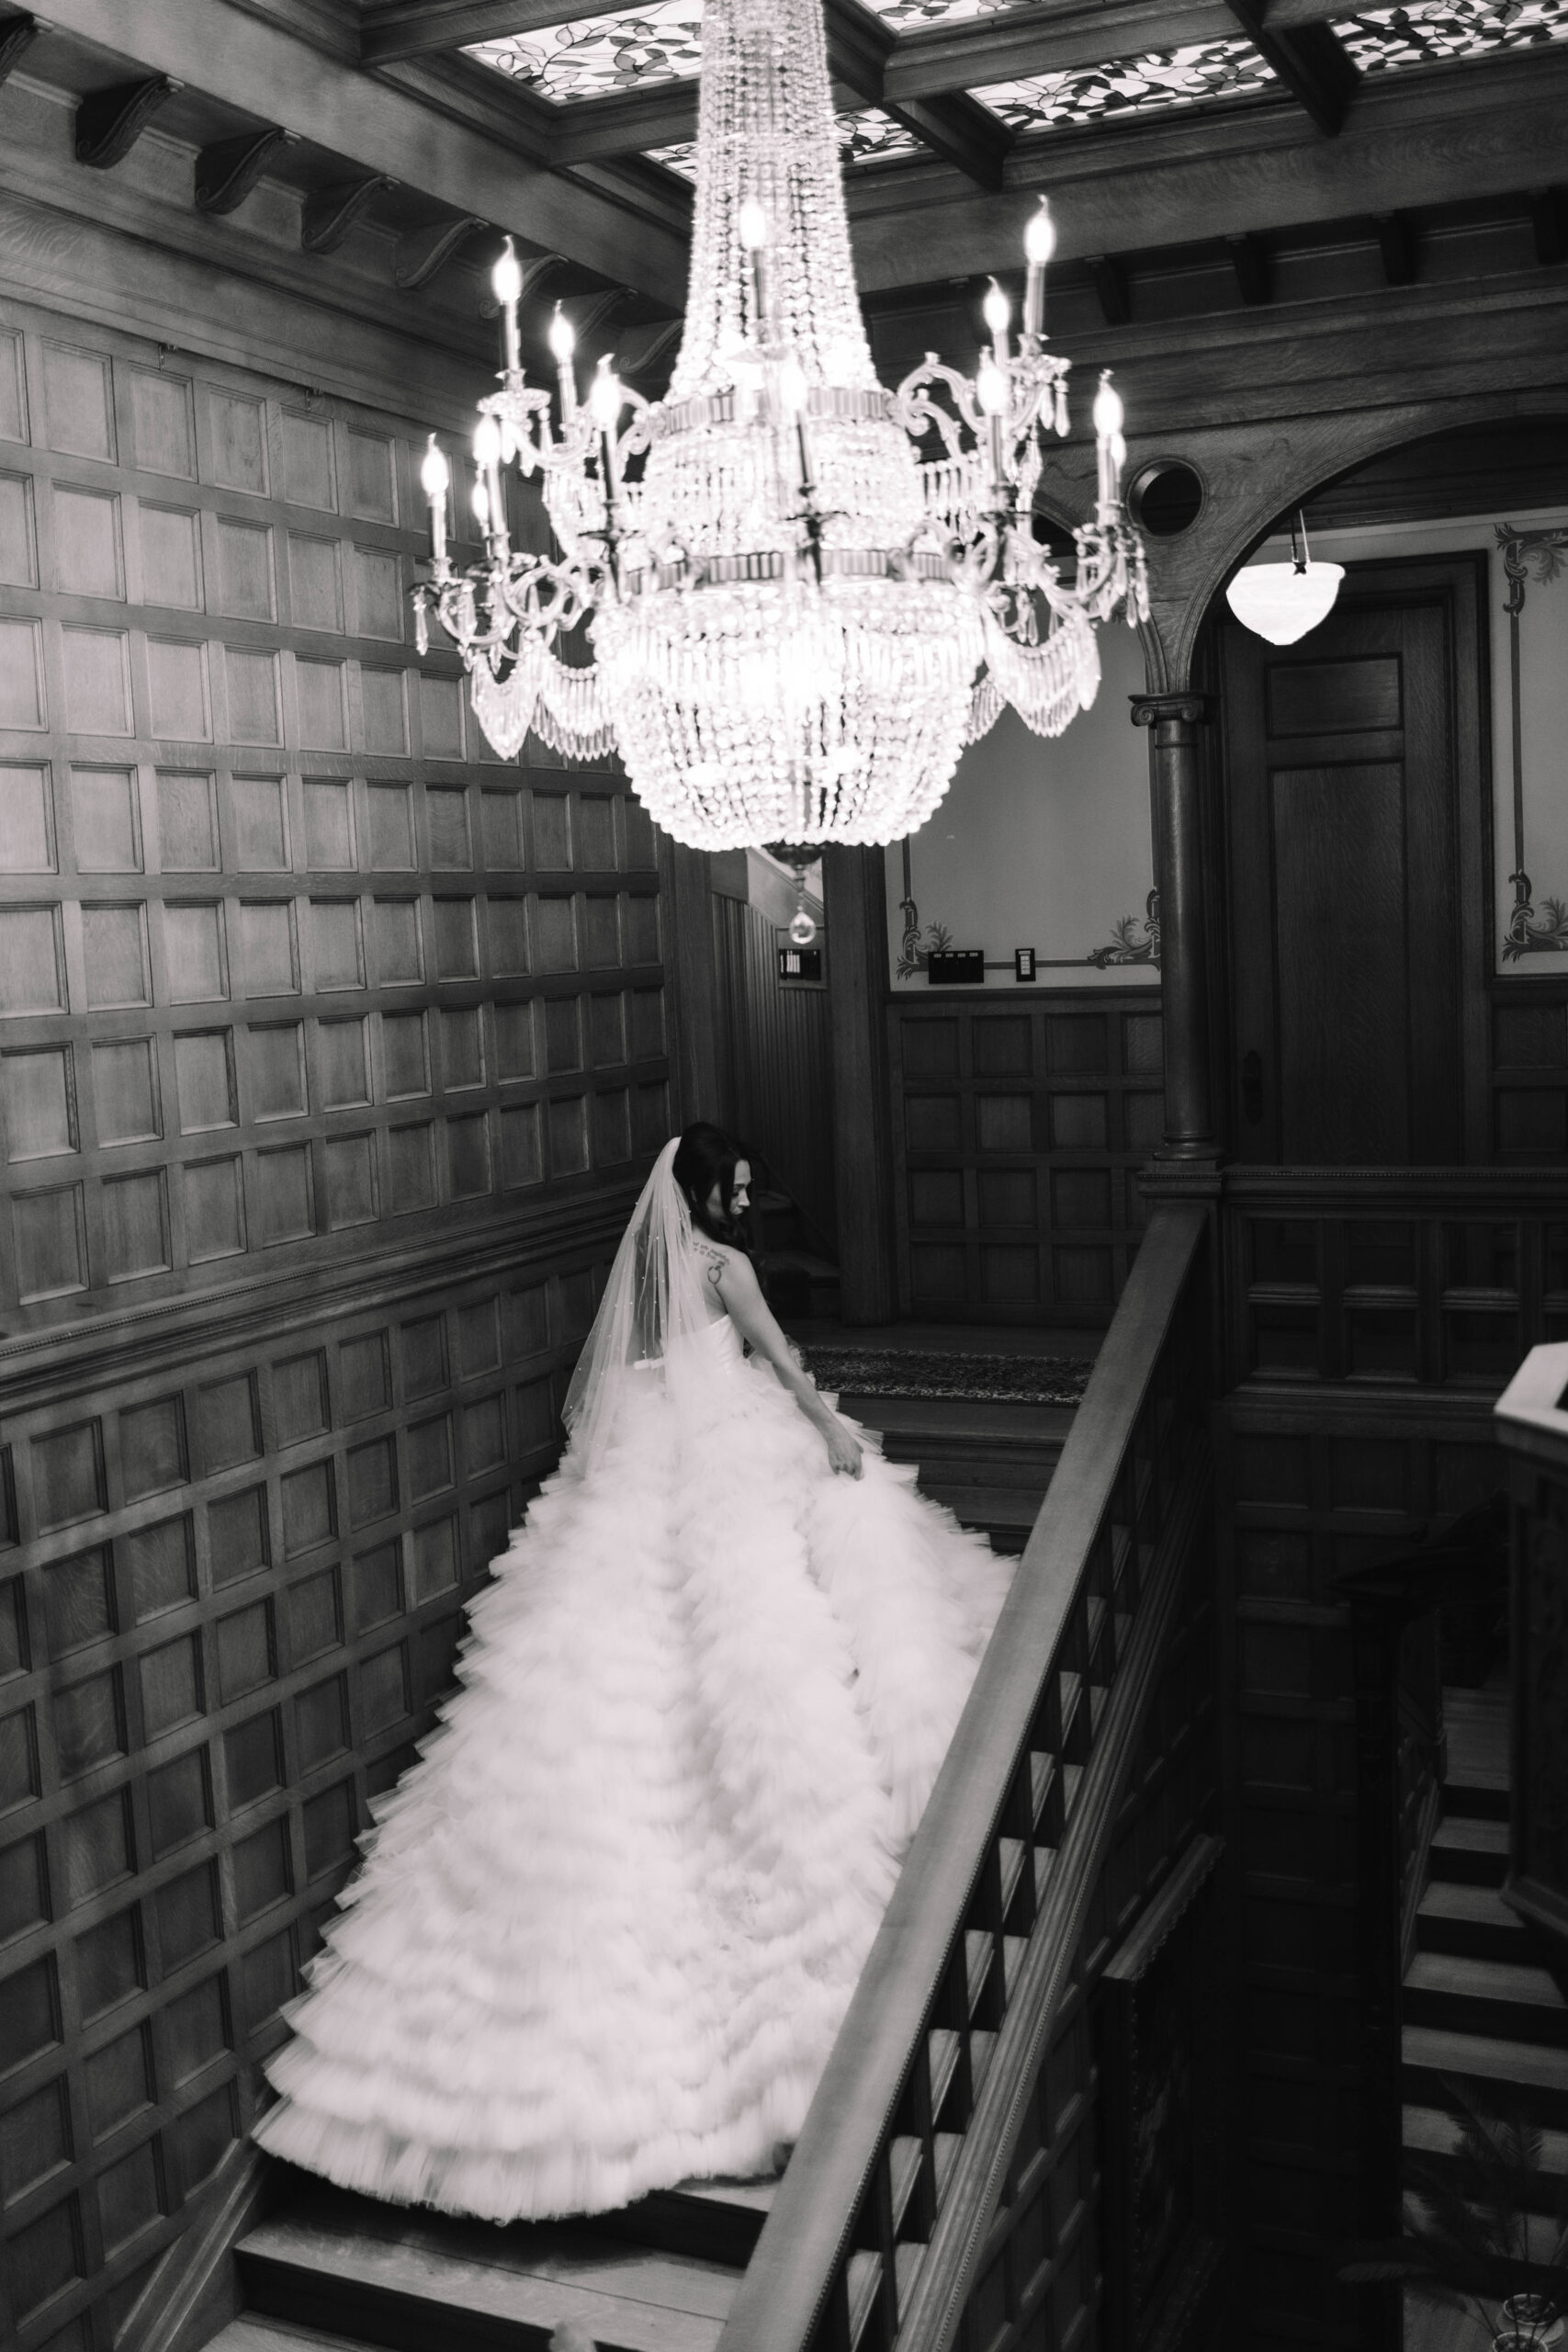 A bride in a voluptuous wedding dress walking up the stairs inside a mansion with a large chandelier hanging above her